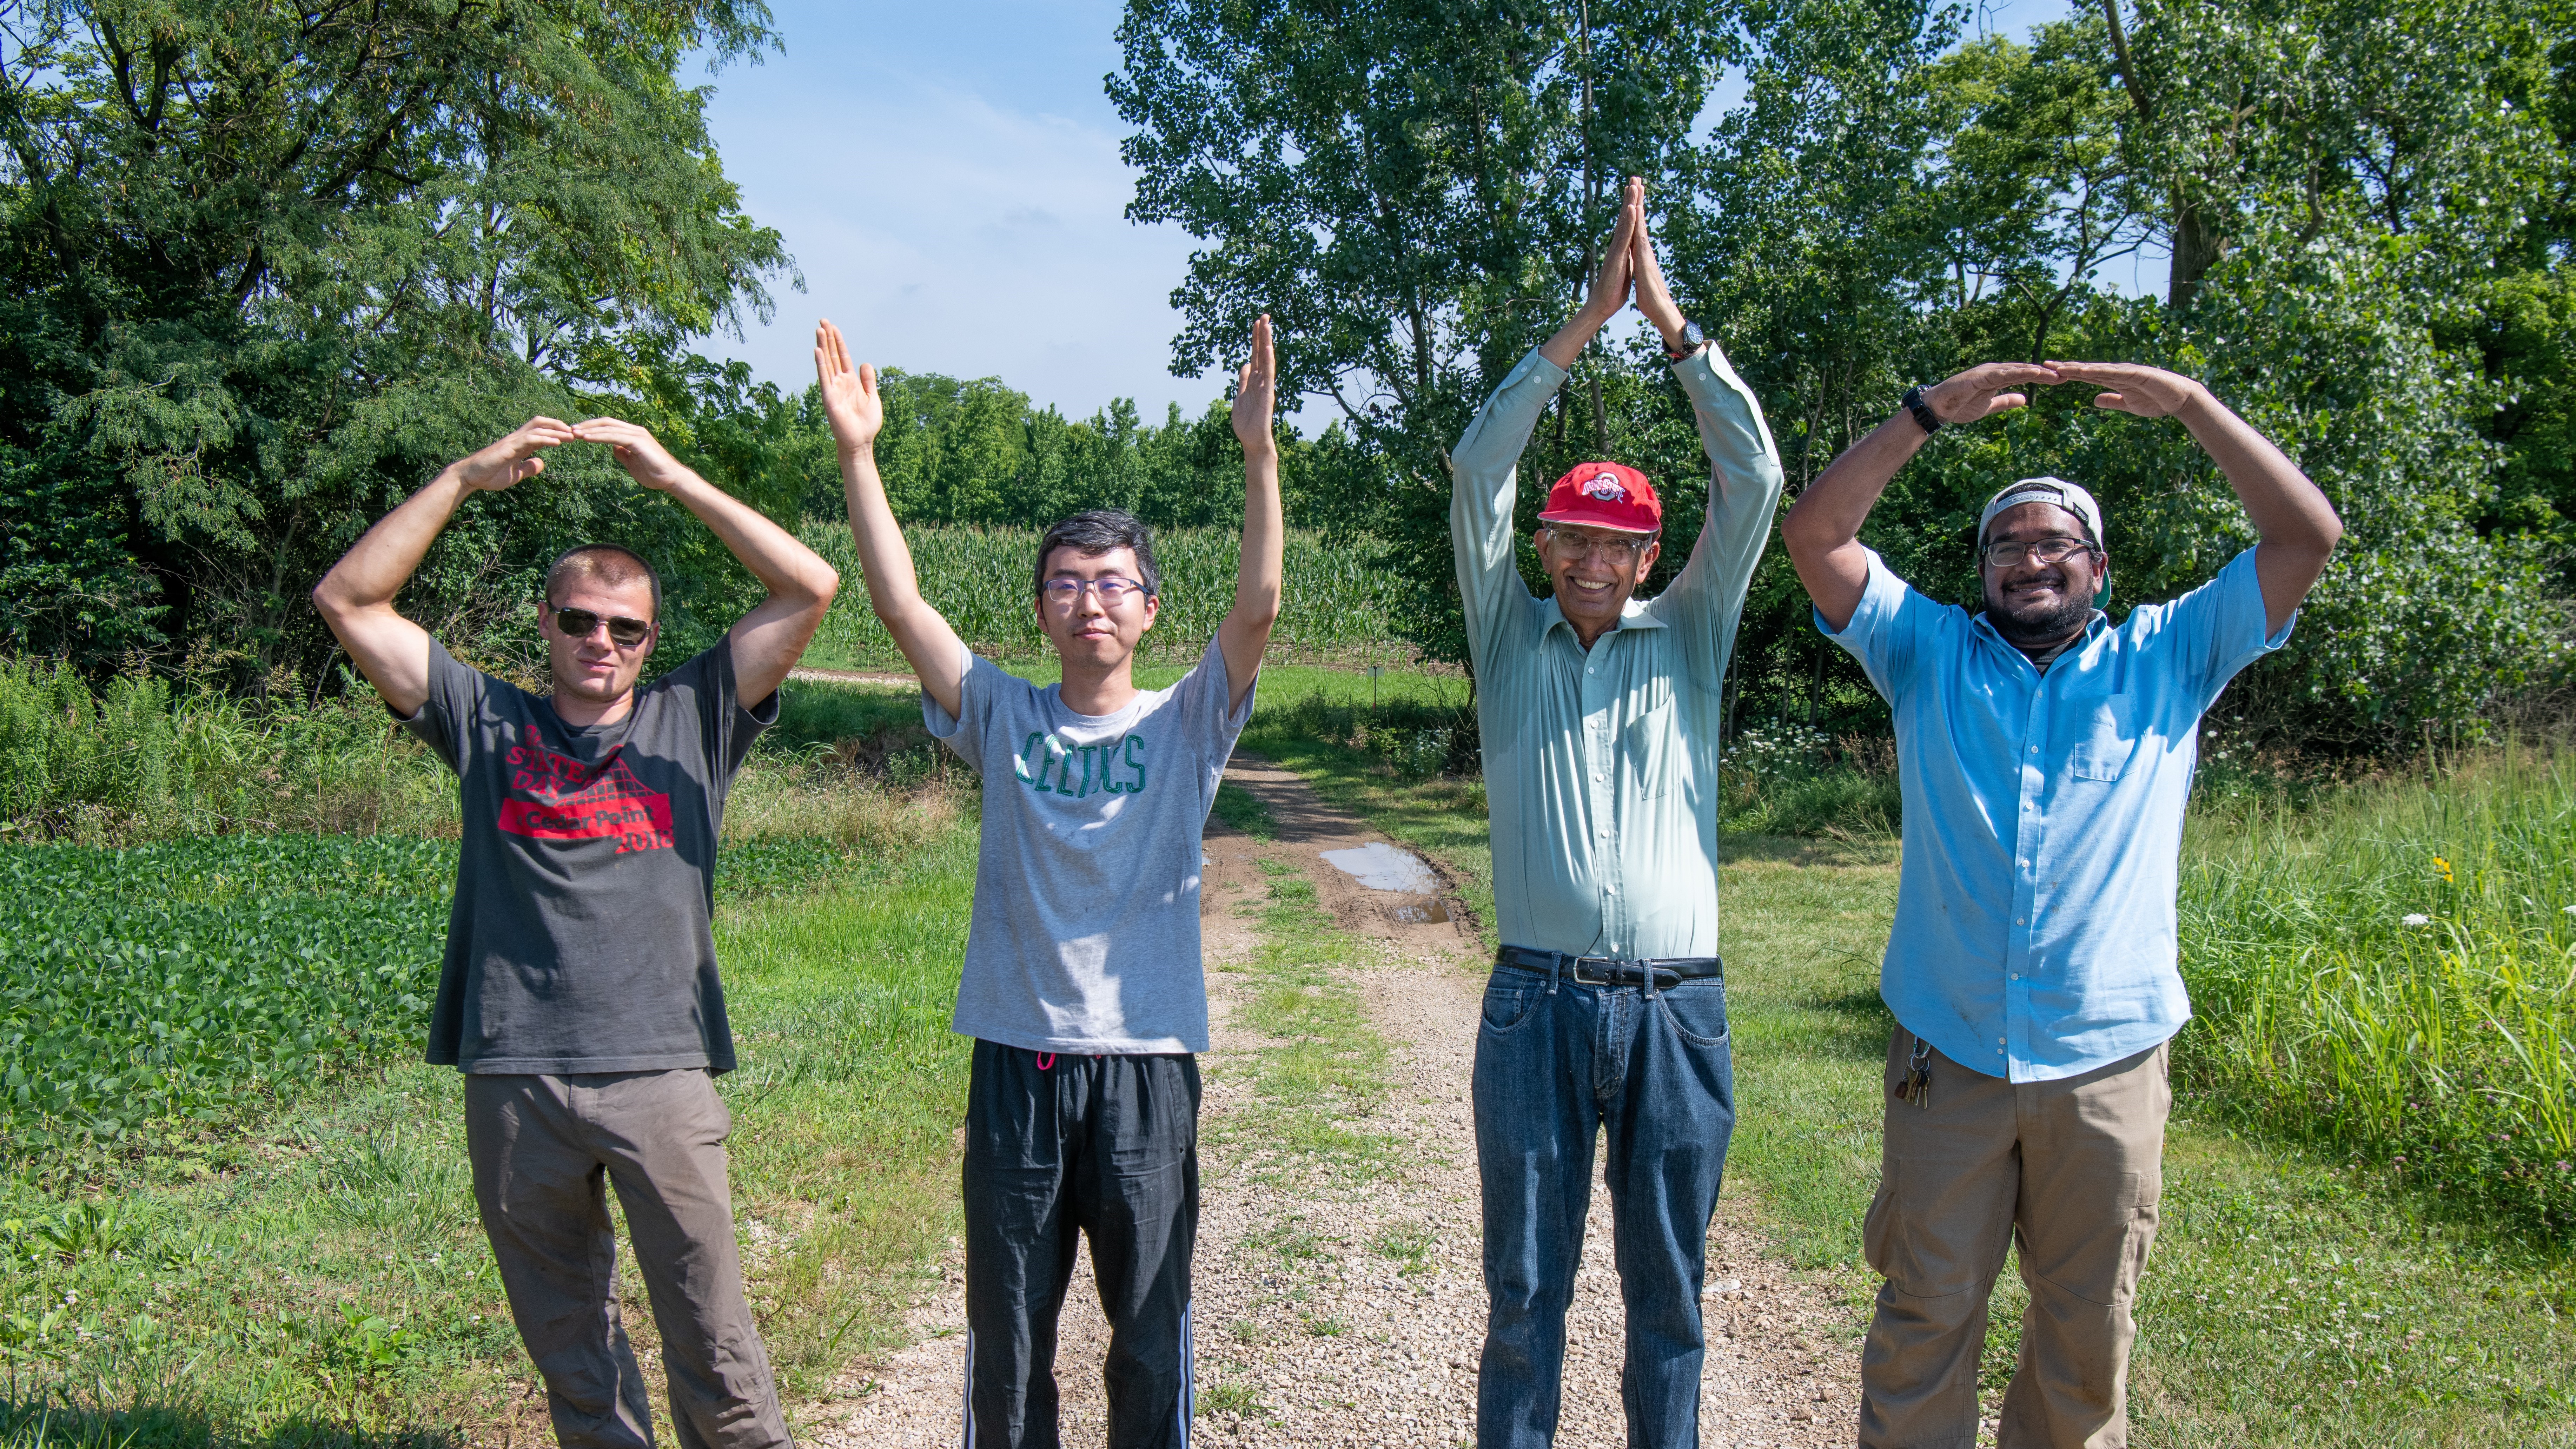 Rattan Lal poses with three students in a field doing the O-H-I-O pose